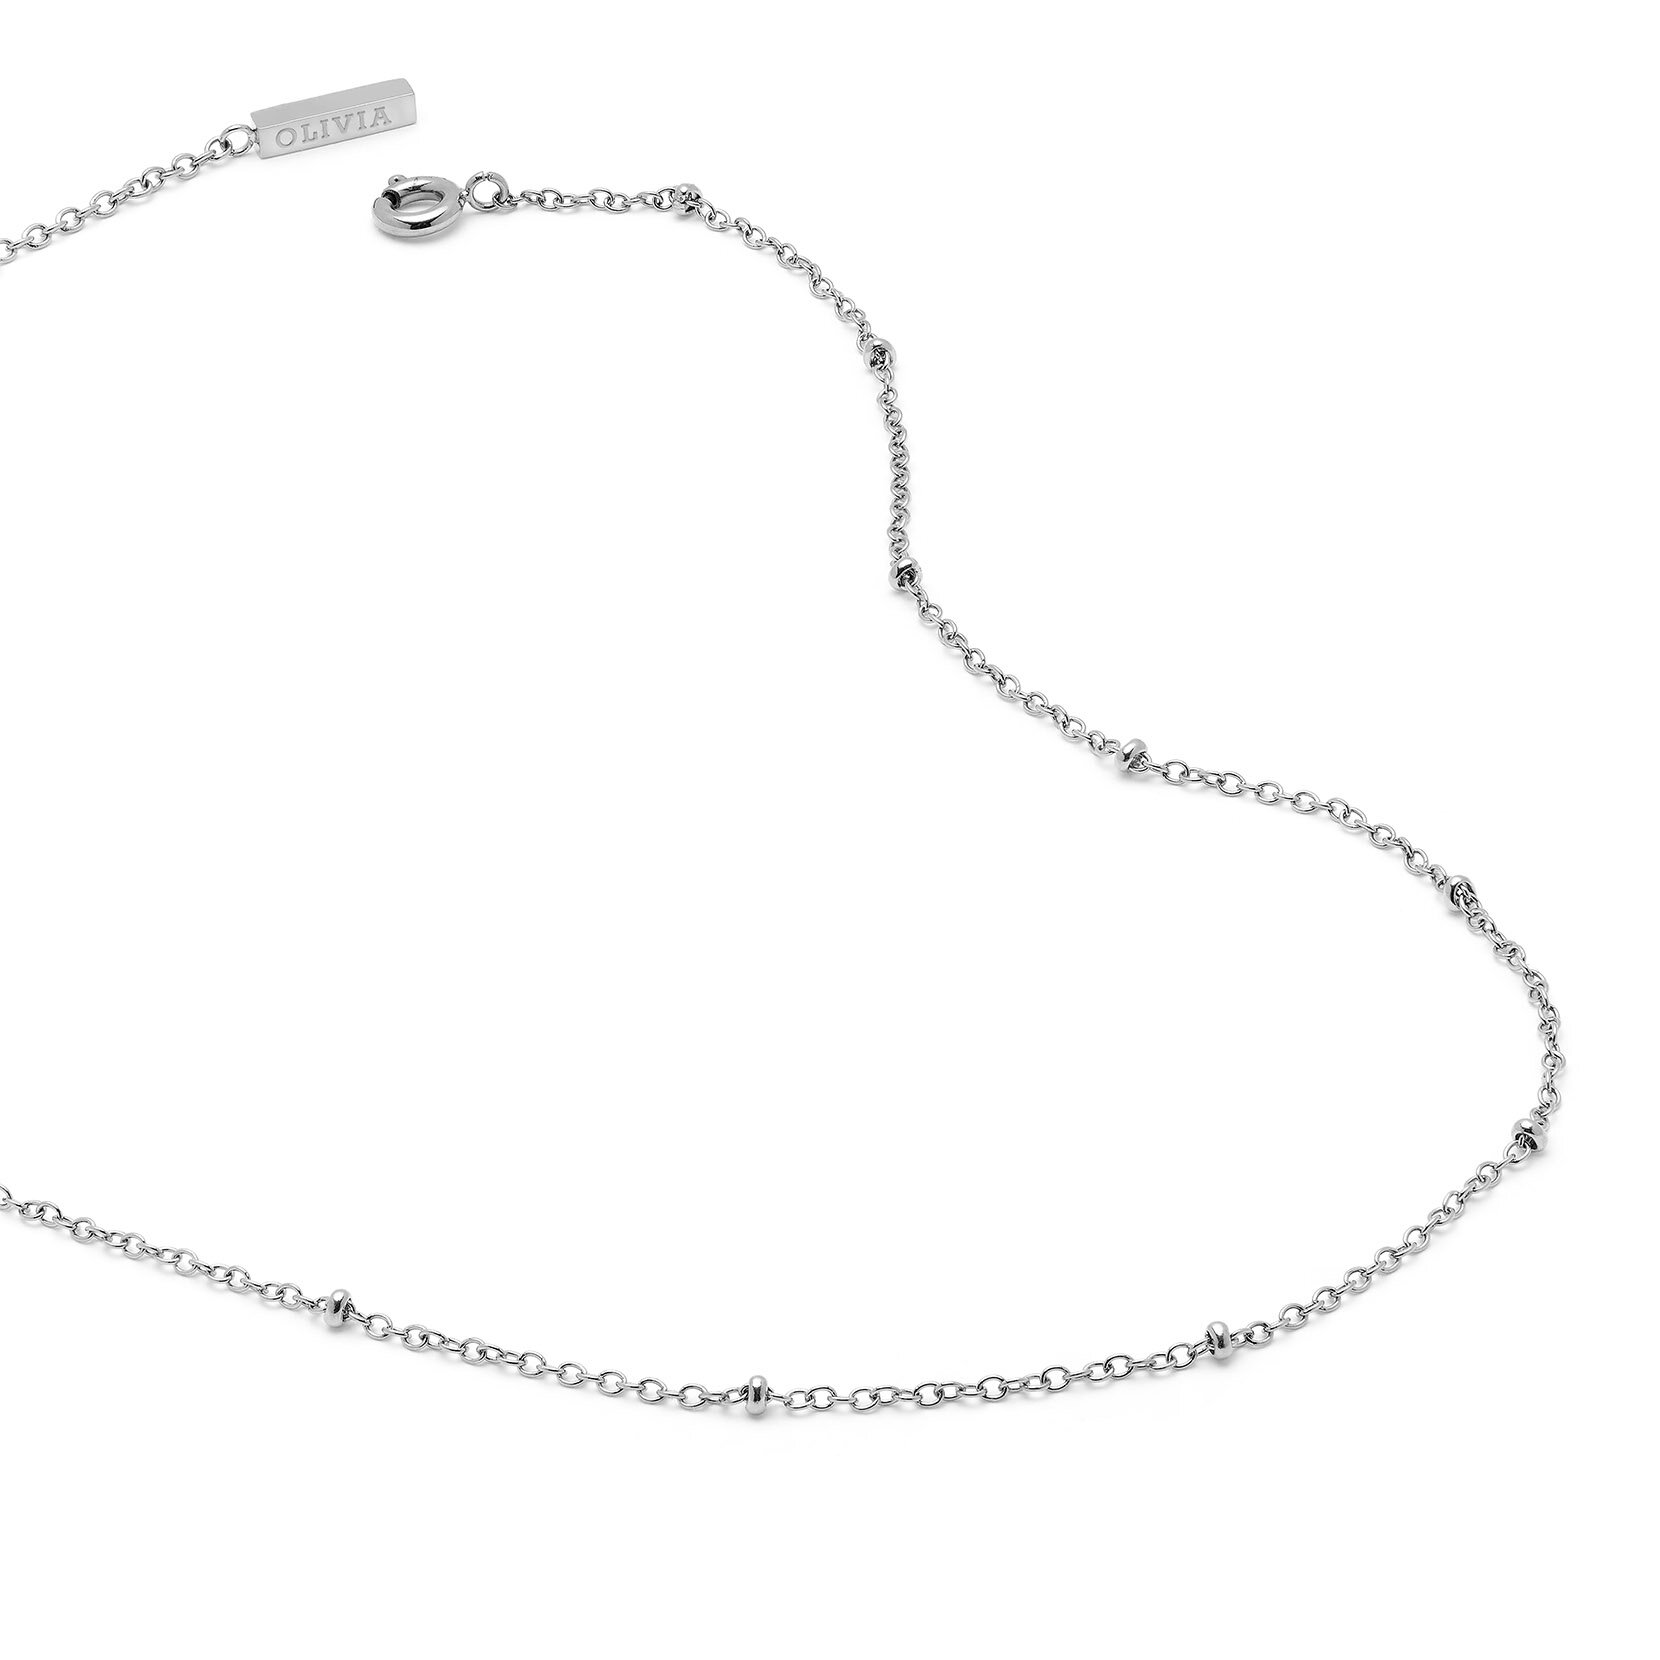 Illusion Silver Stacking Necklace Set